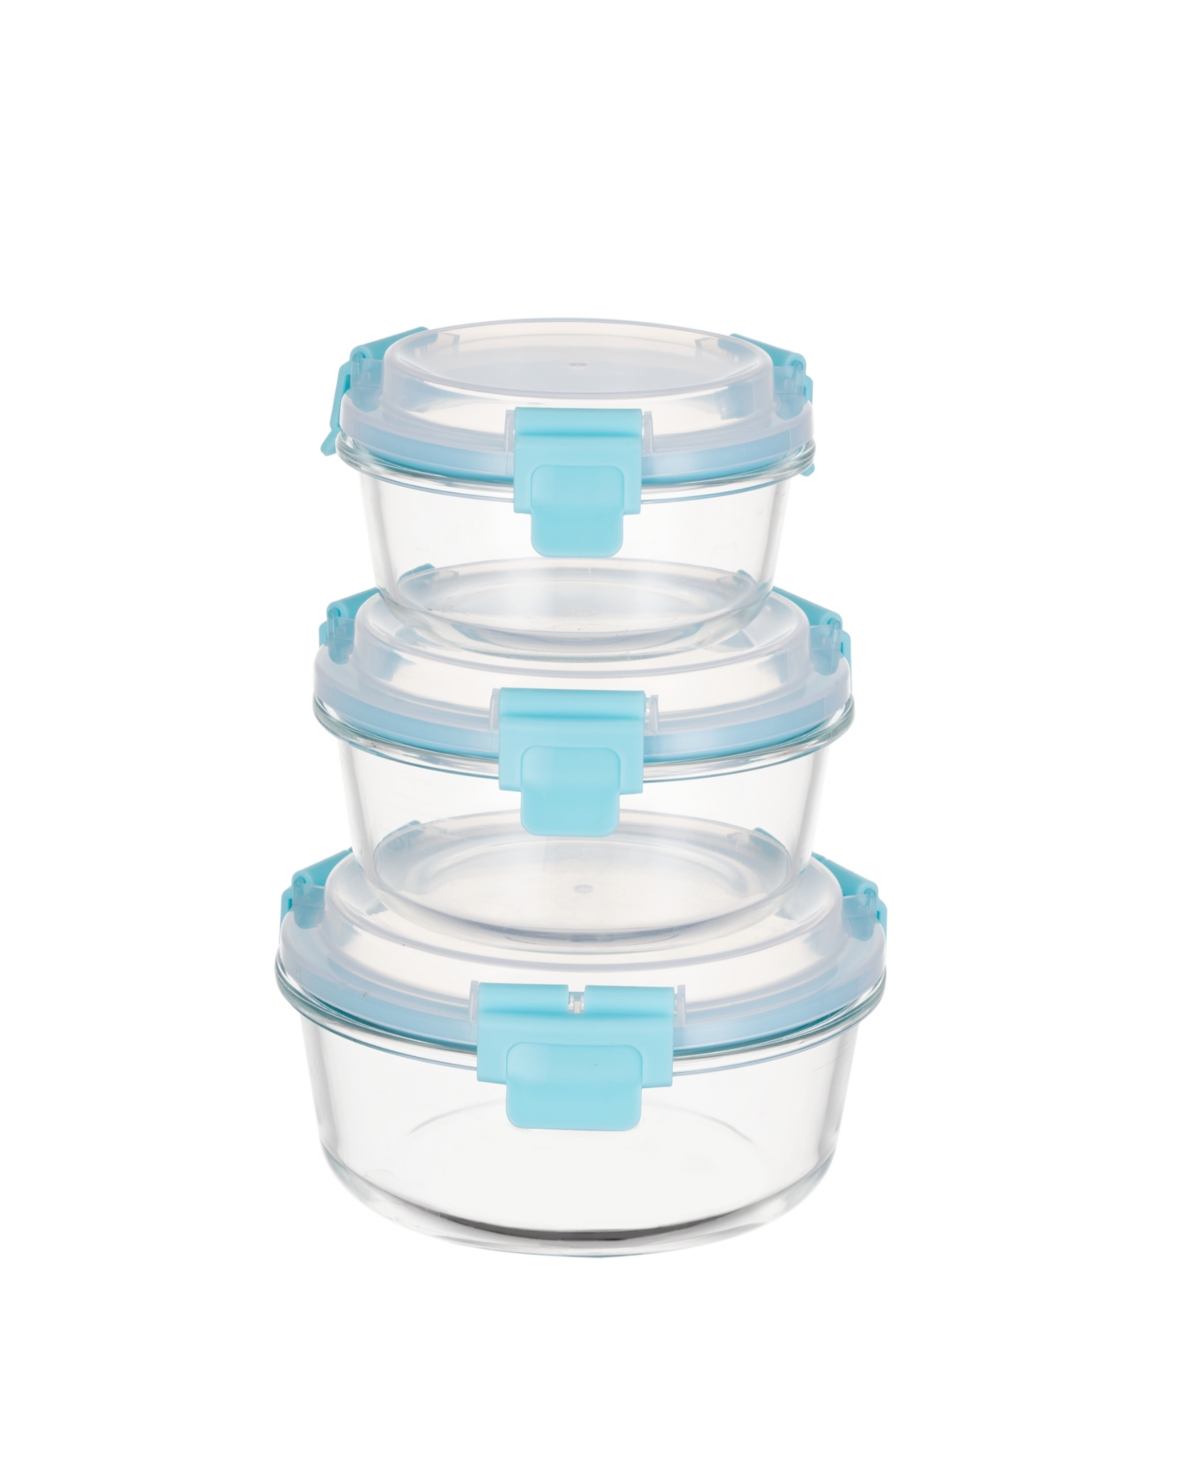 Genicook 3 Pc Round Container Hi-top Lids With Pro Grade Removable Lockdown Levers Set In Aqua Blue